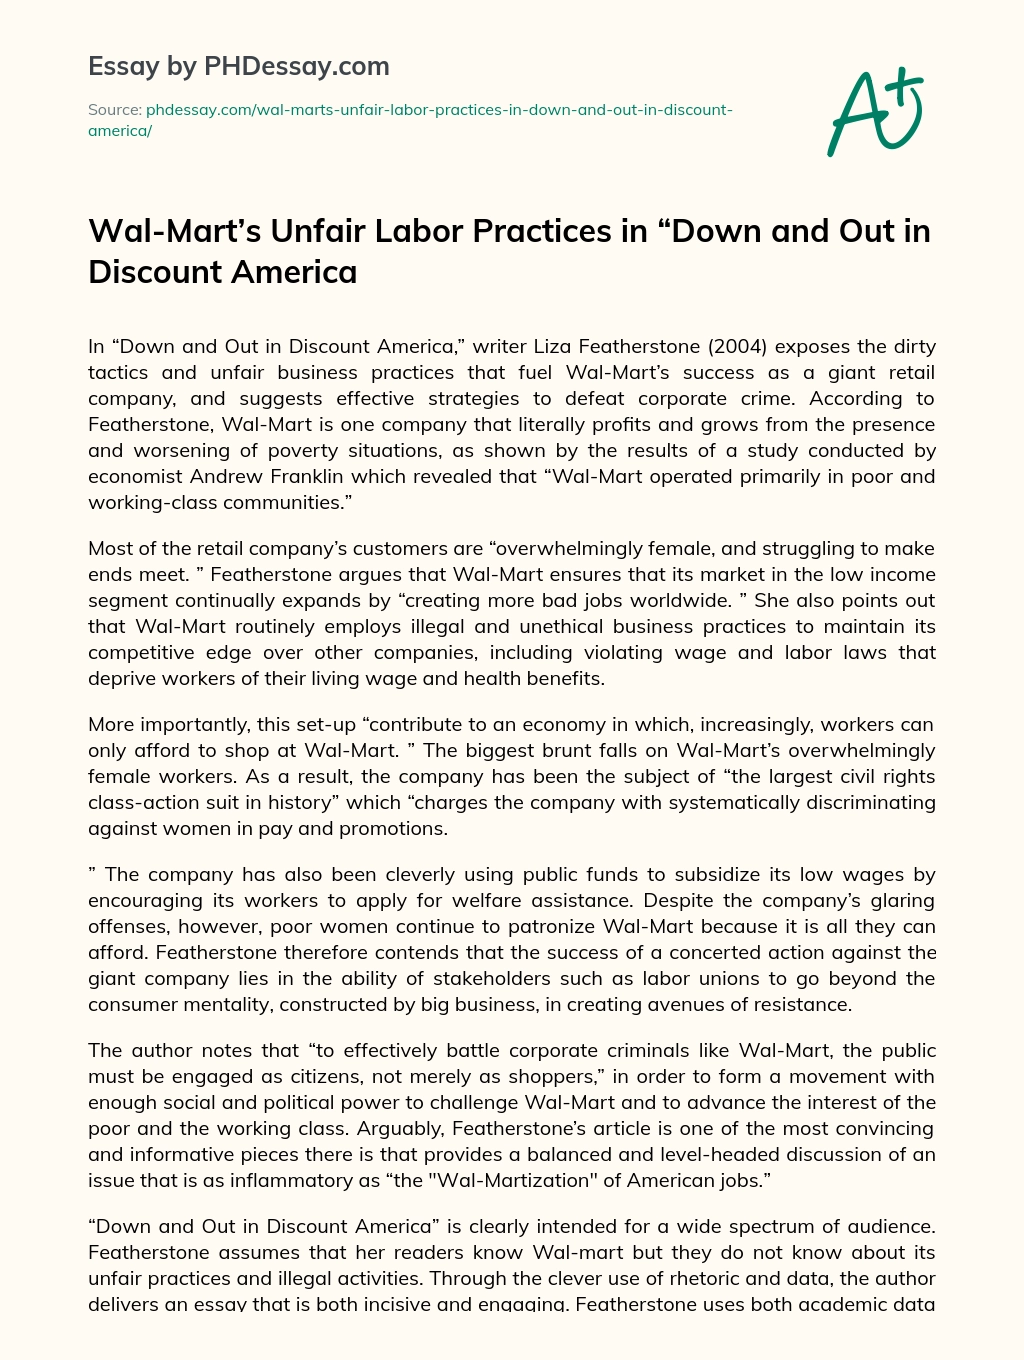 Wal-Mart’s Unfair Labor Practices in “Down and Out in Discount America essay